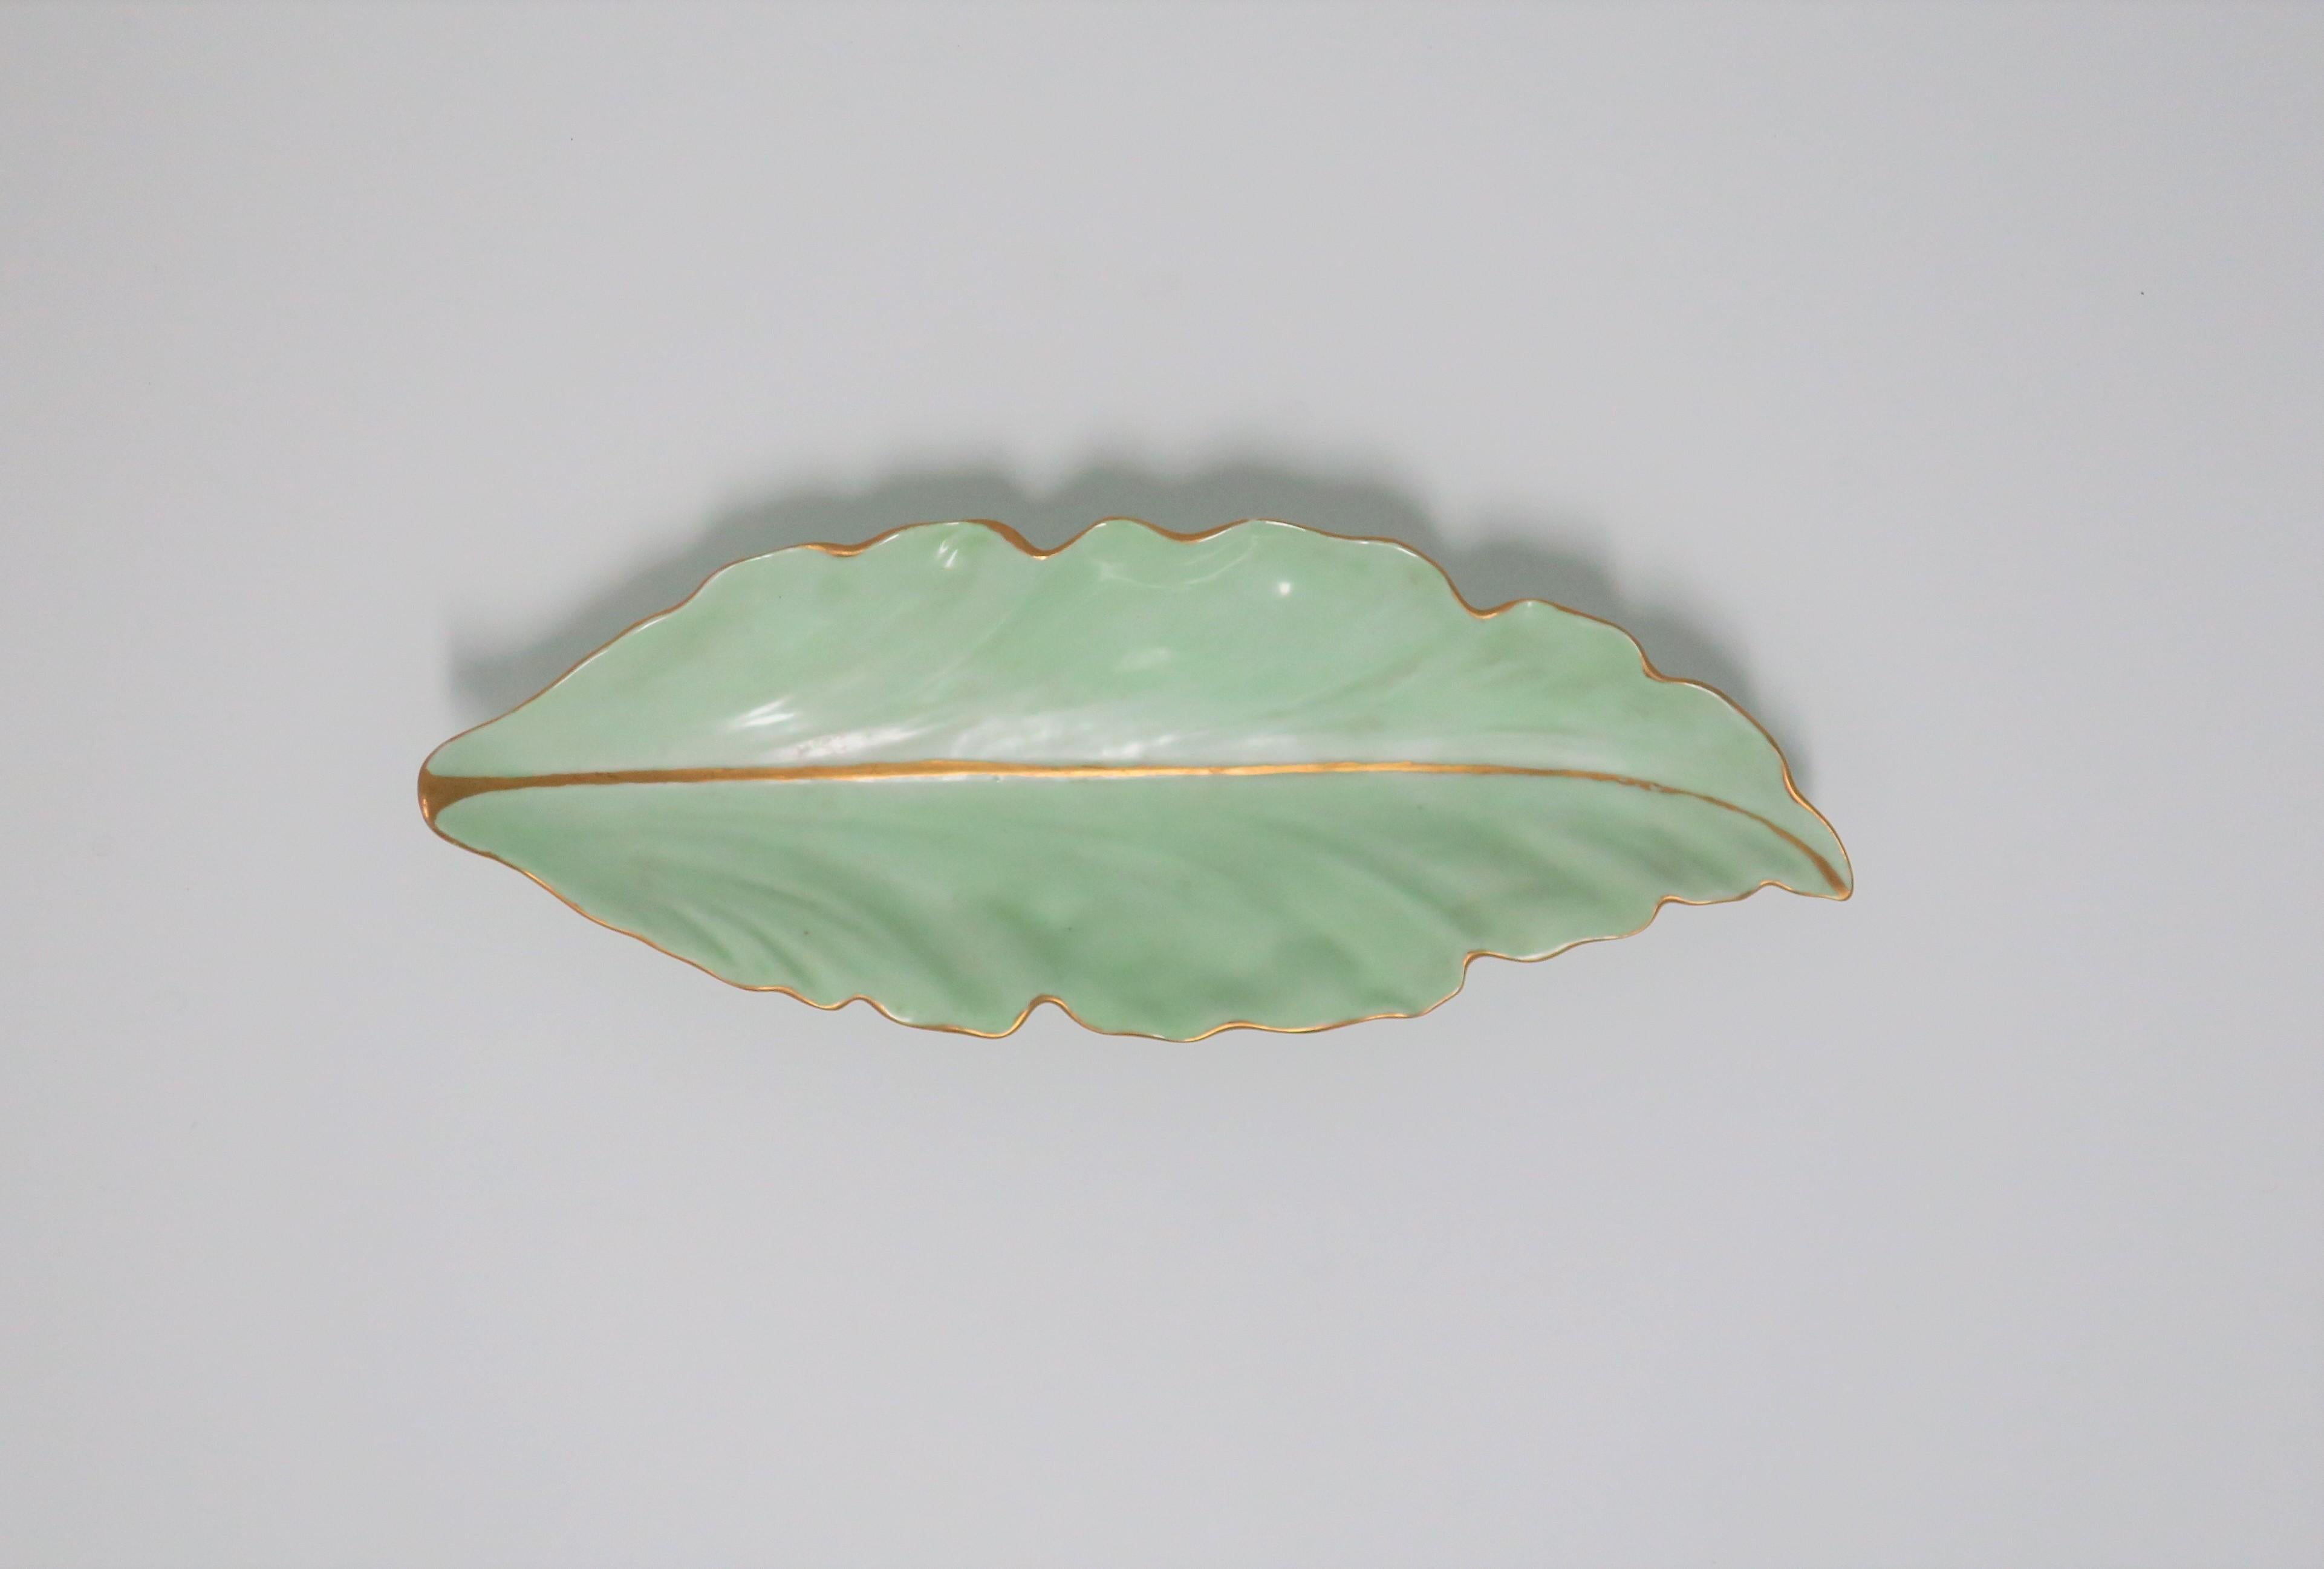 A beautiful European oblong light green porcelain leaf dish with hand painted gold accent, circa mid-20th century, Vienna, Austria. With maker's mark on bottom (images #10 and 11.)

Piece measures: 2.25